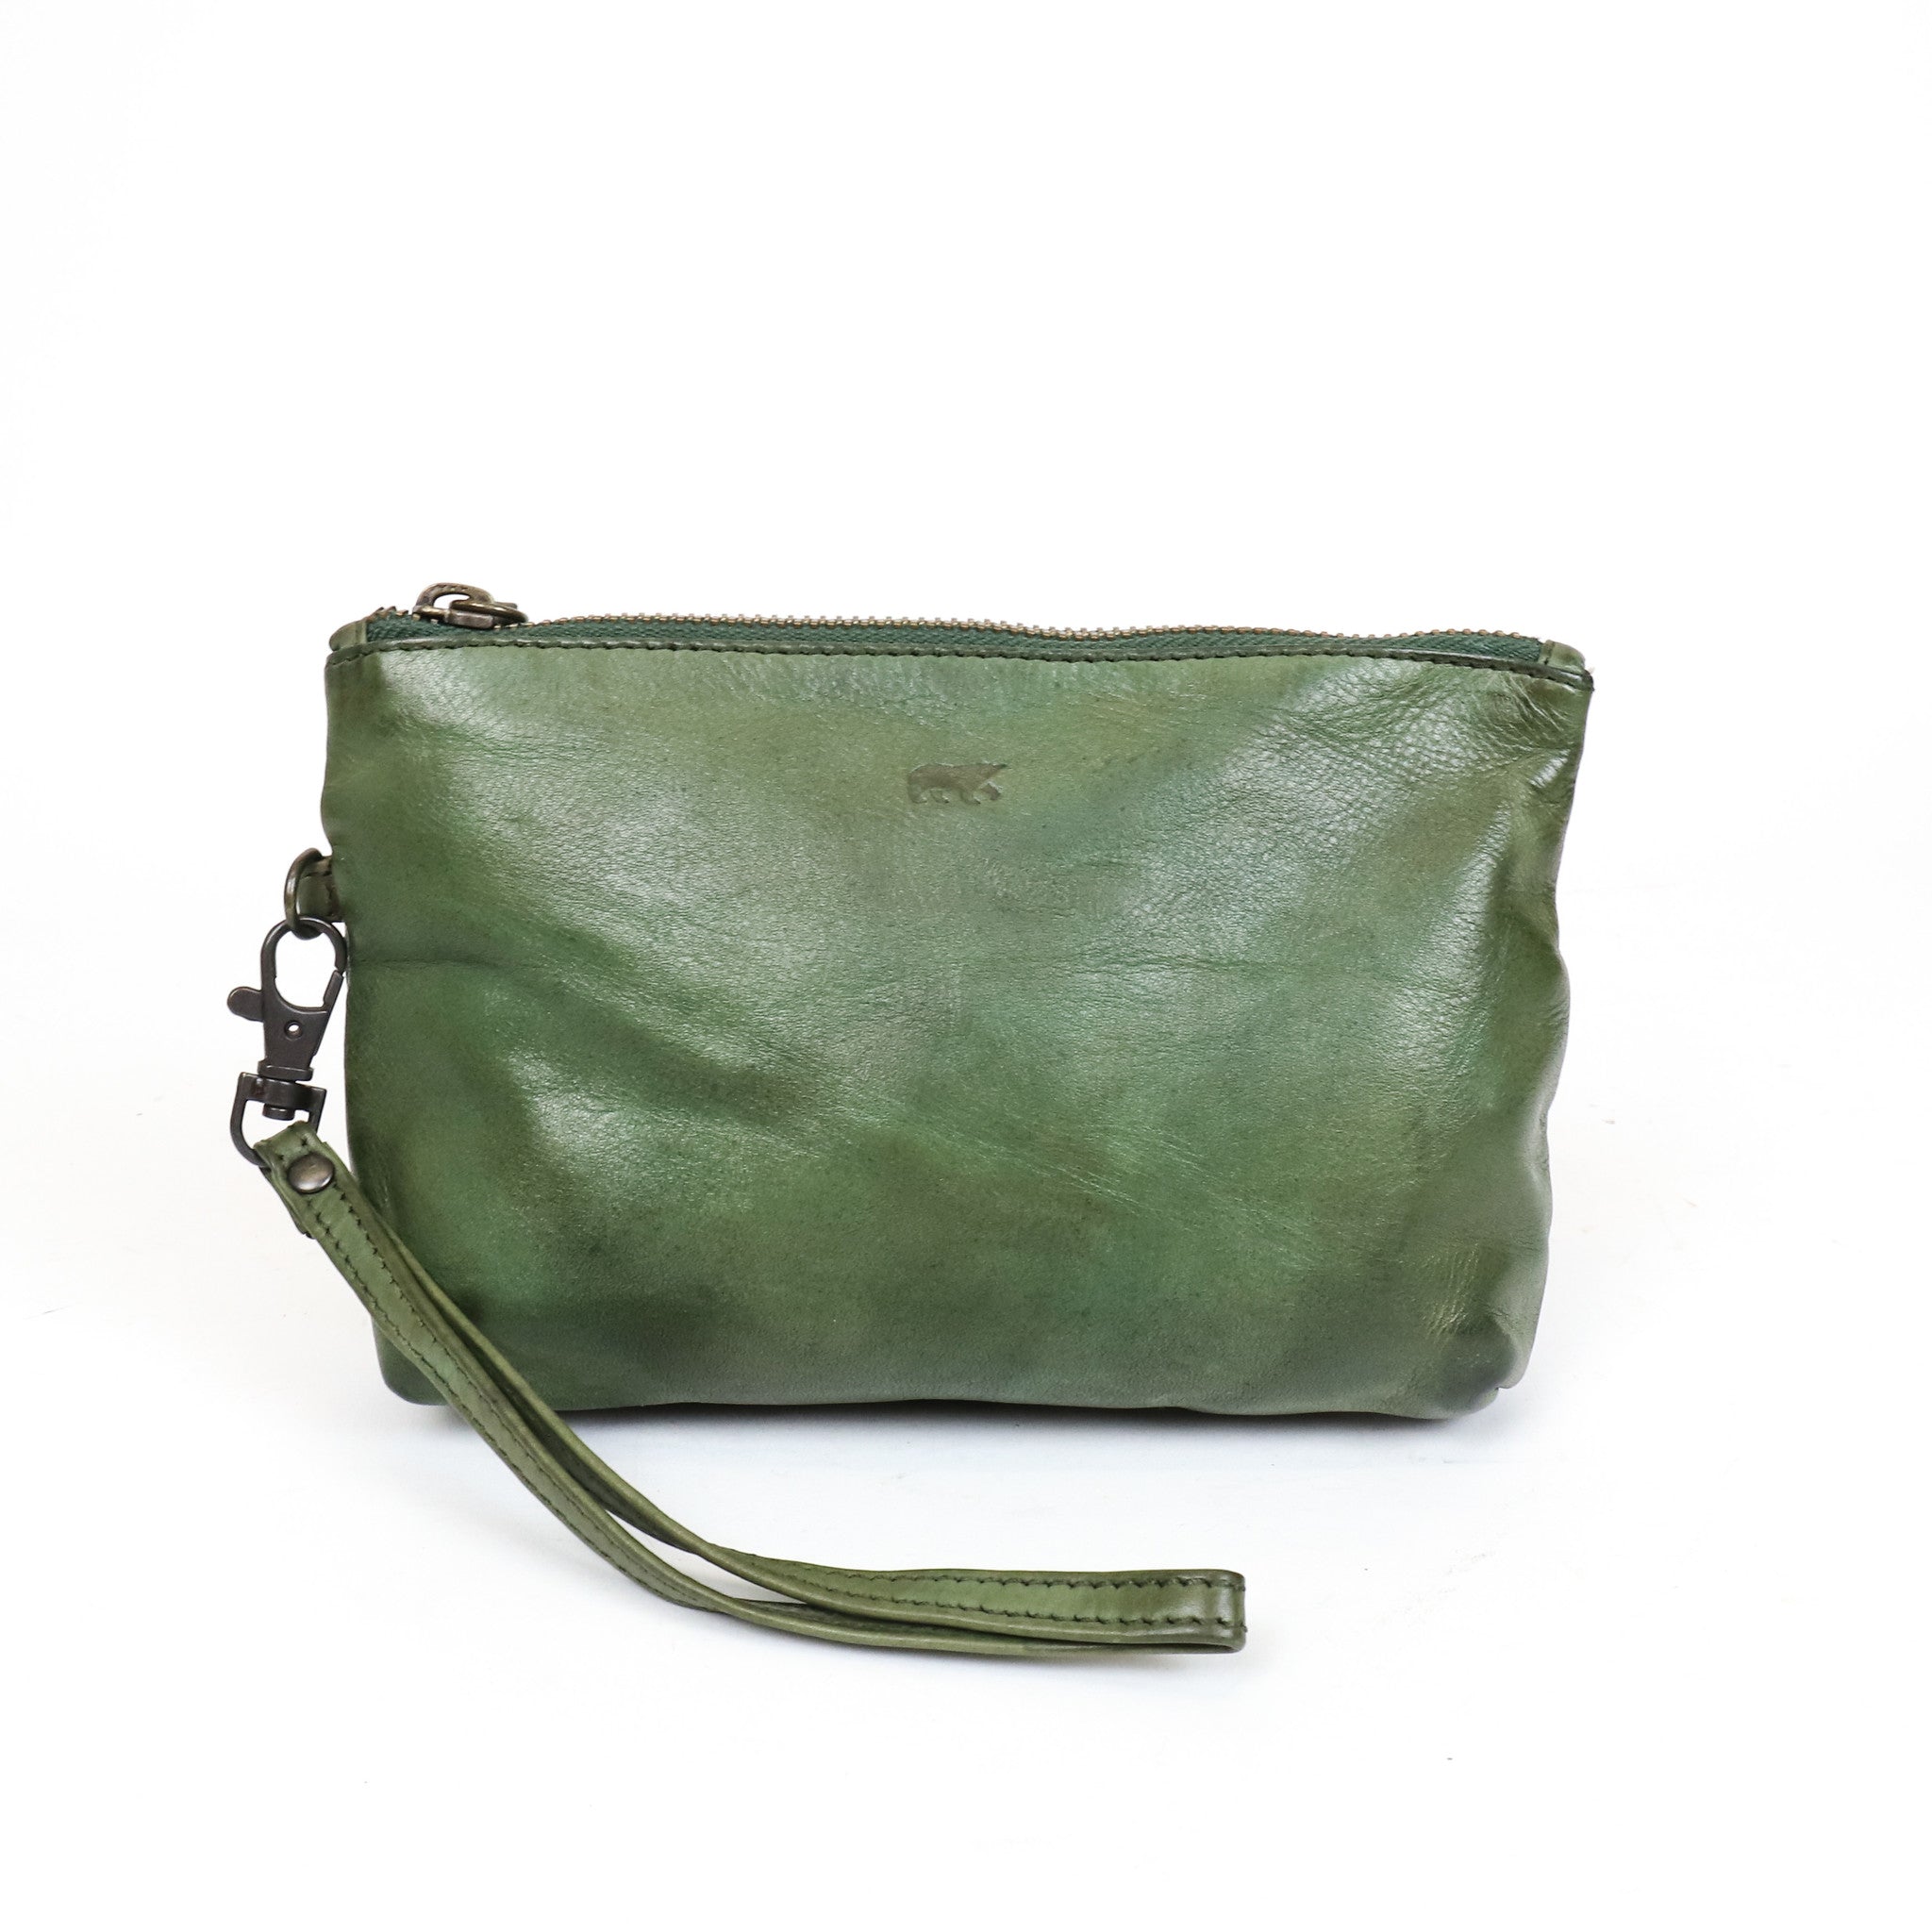 Pouch 'Sjors' olive green - CL 12510